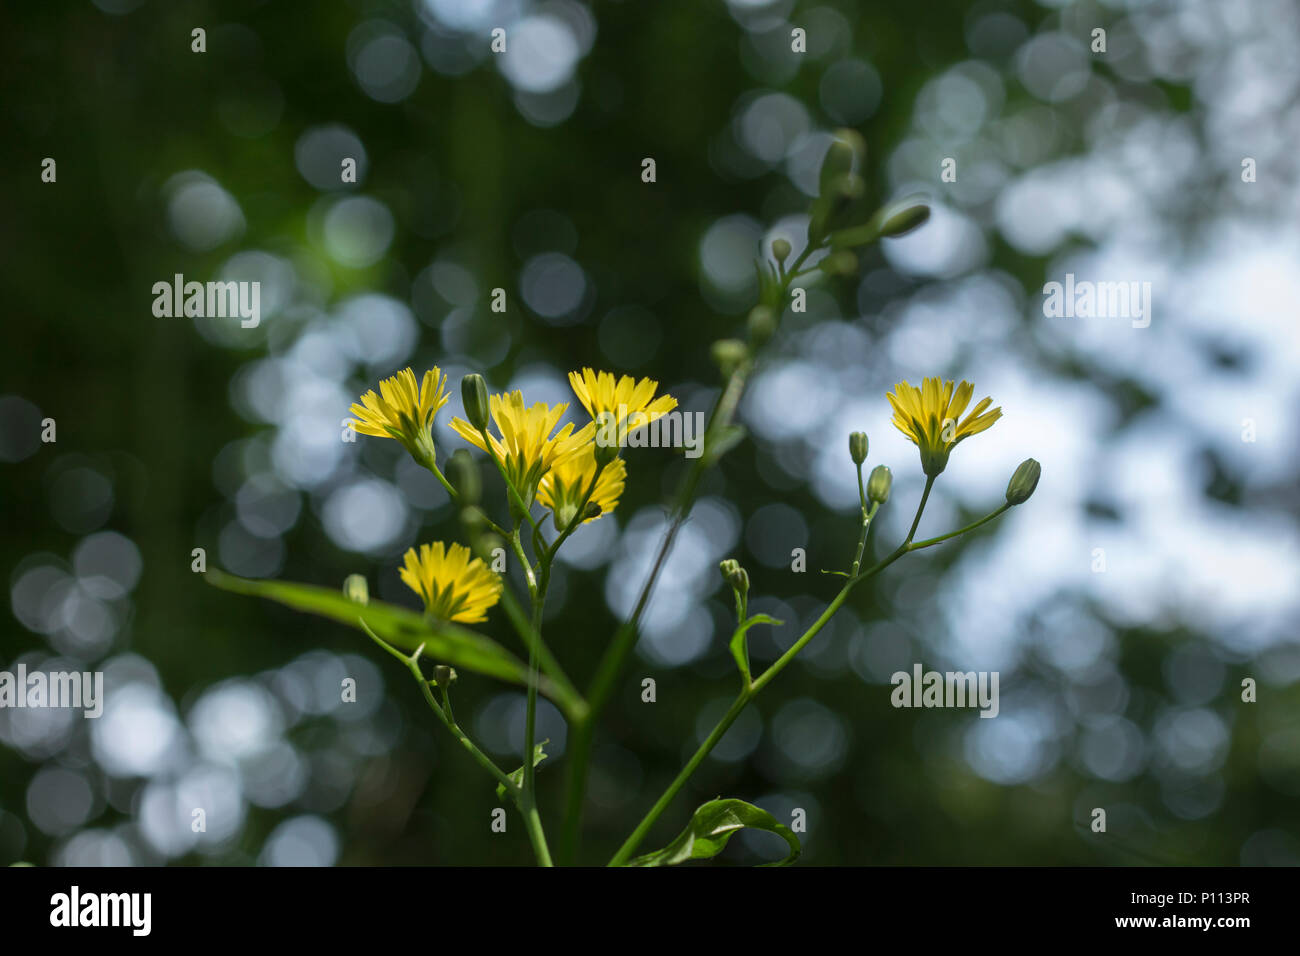 Yellow flowers of Nipplewort / Lapsana communis. Young leaves may be eaten cooked as a survival food. Stock Photo